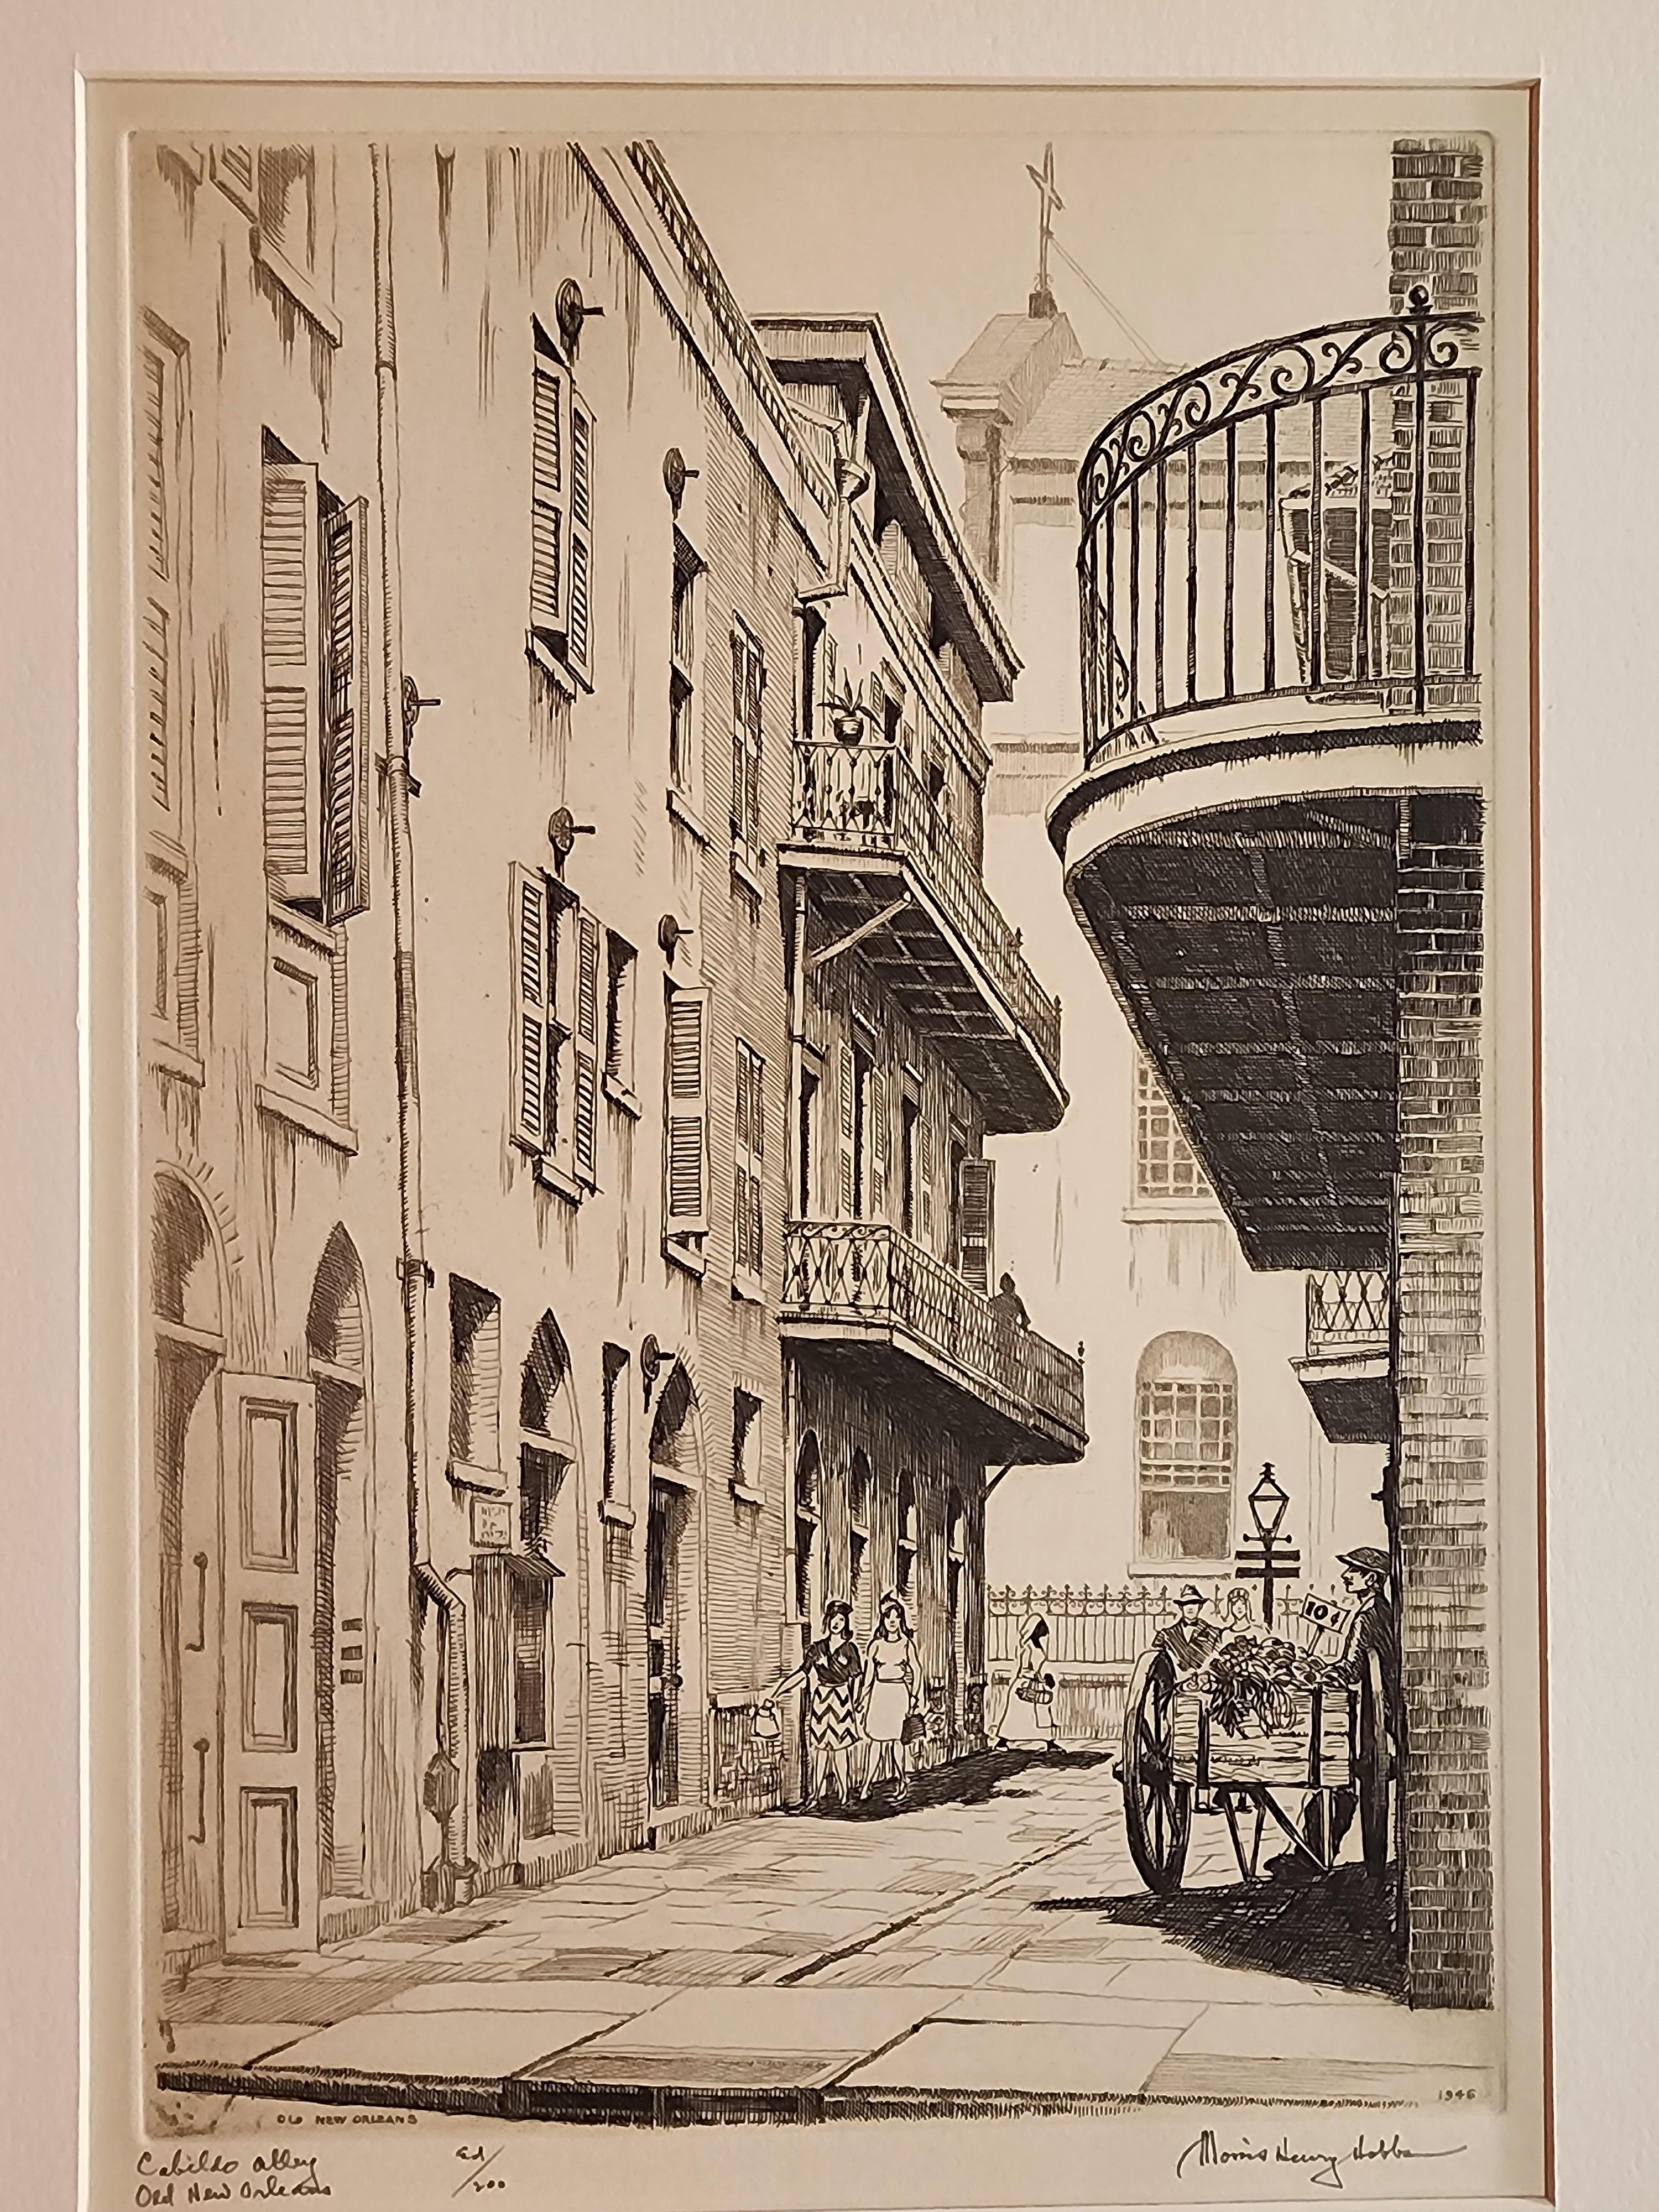 An etching on paper by Morris Henry Hobbs of Cabilio Alley in Old New Orleans.
This impression is richly inked and in excellent condition with large margins.